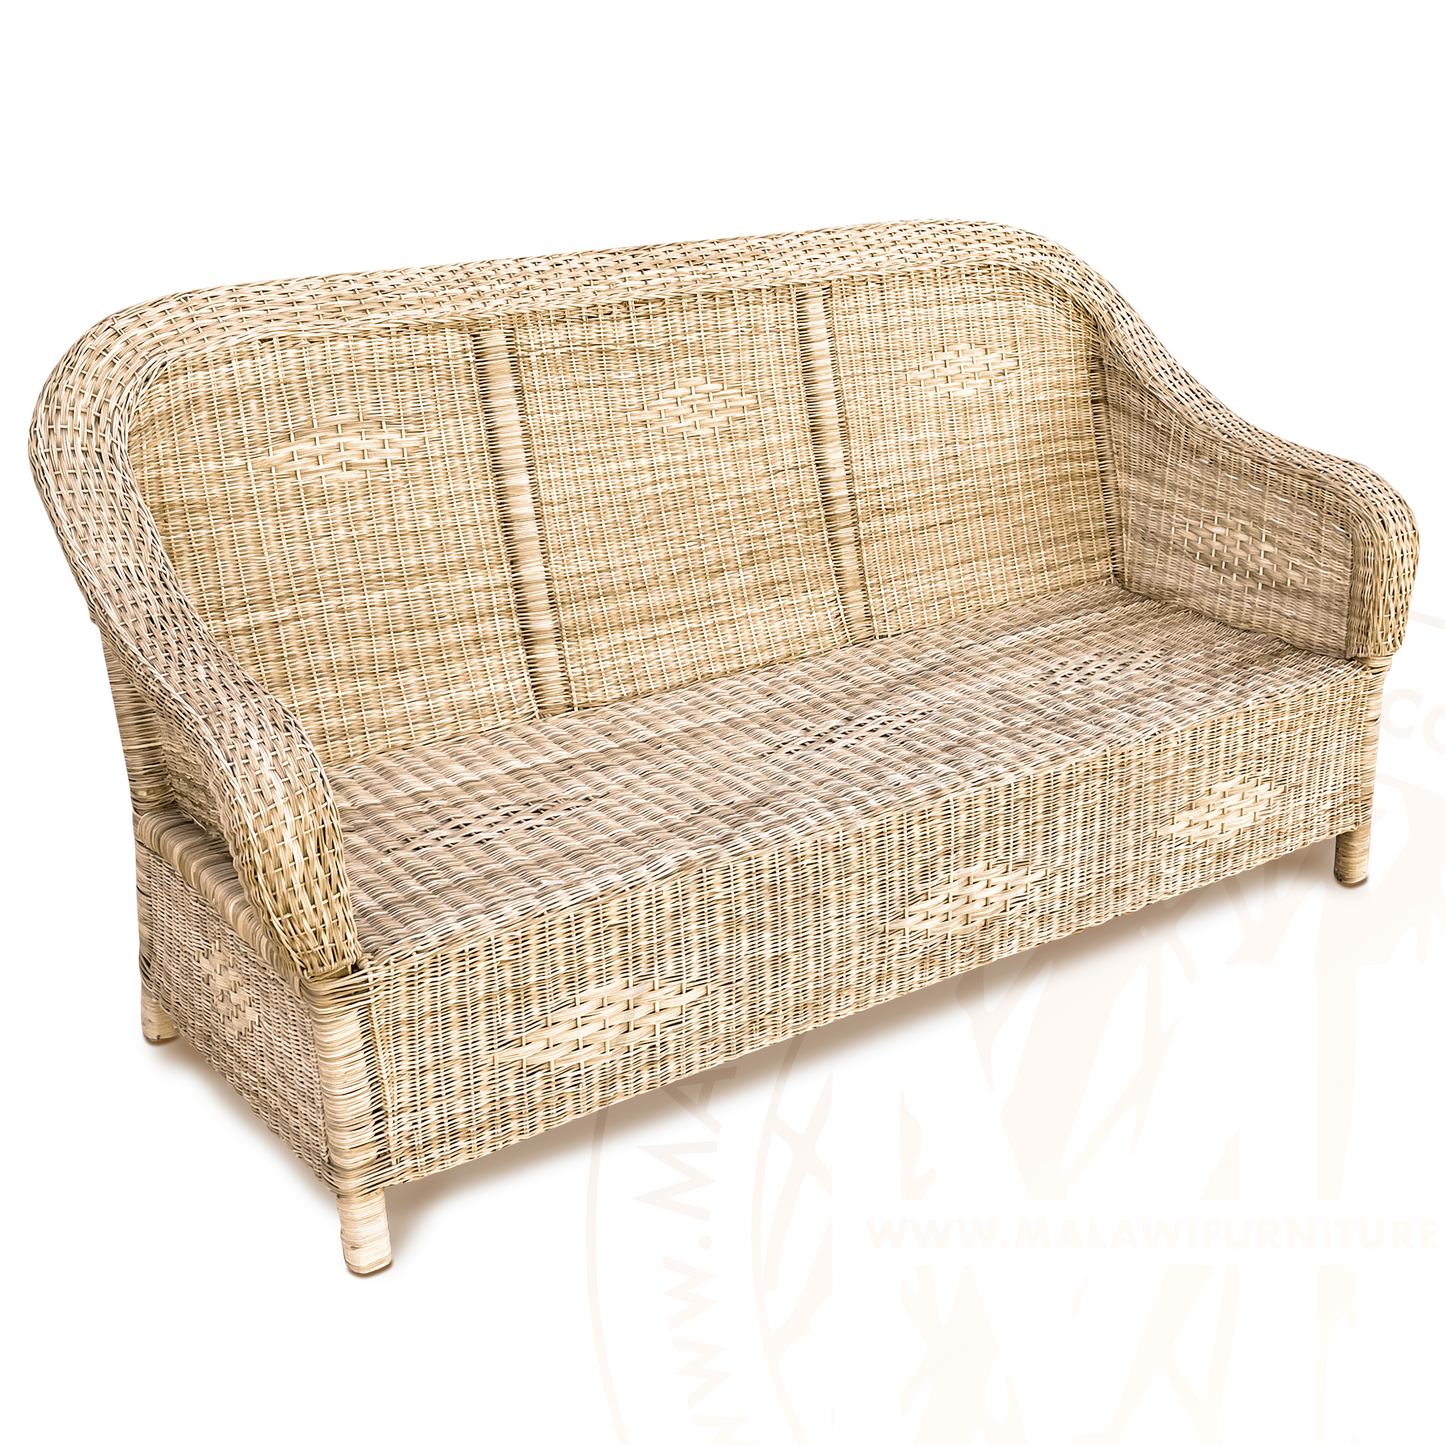 Classic Malawi Couch Set (3,2,1 Seater & Grass Mat)